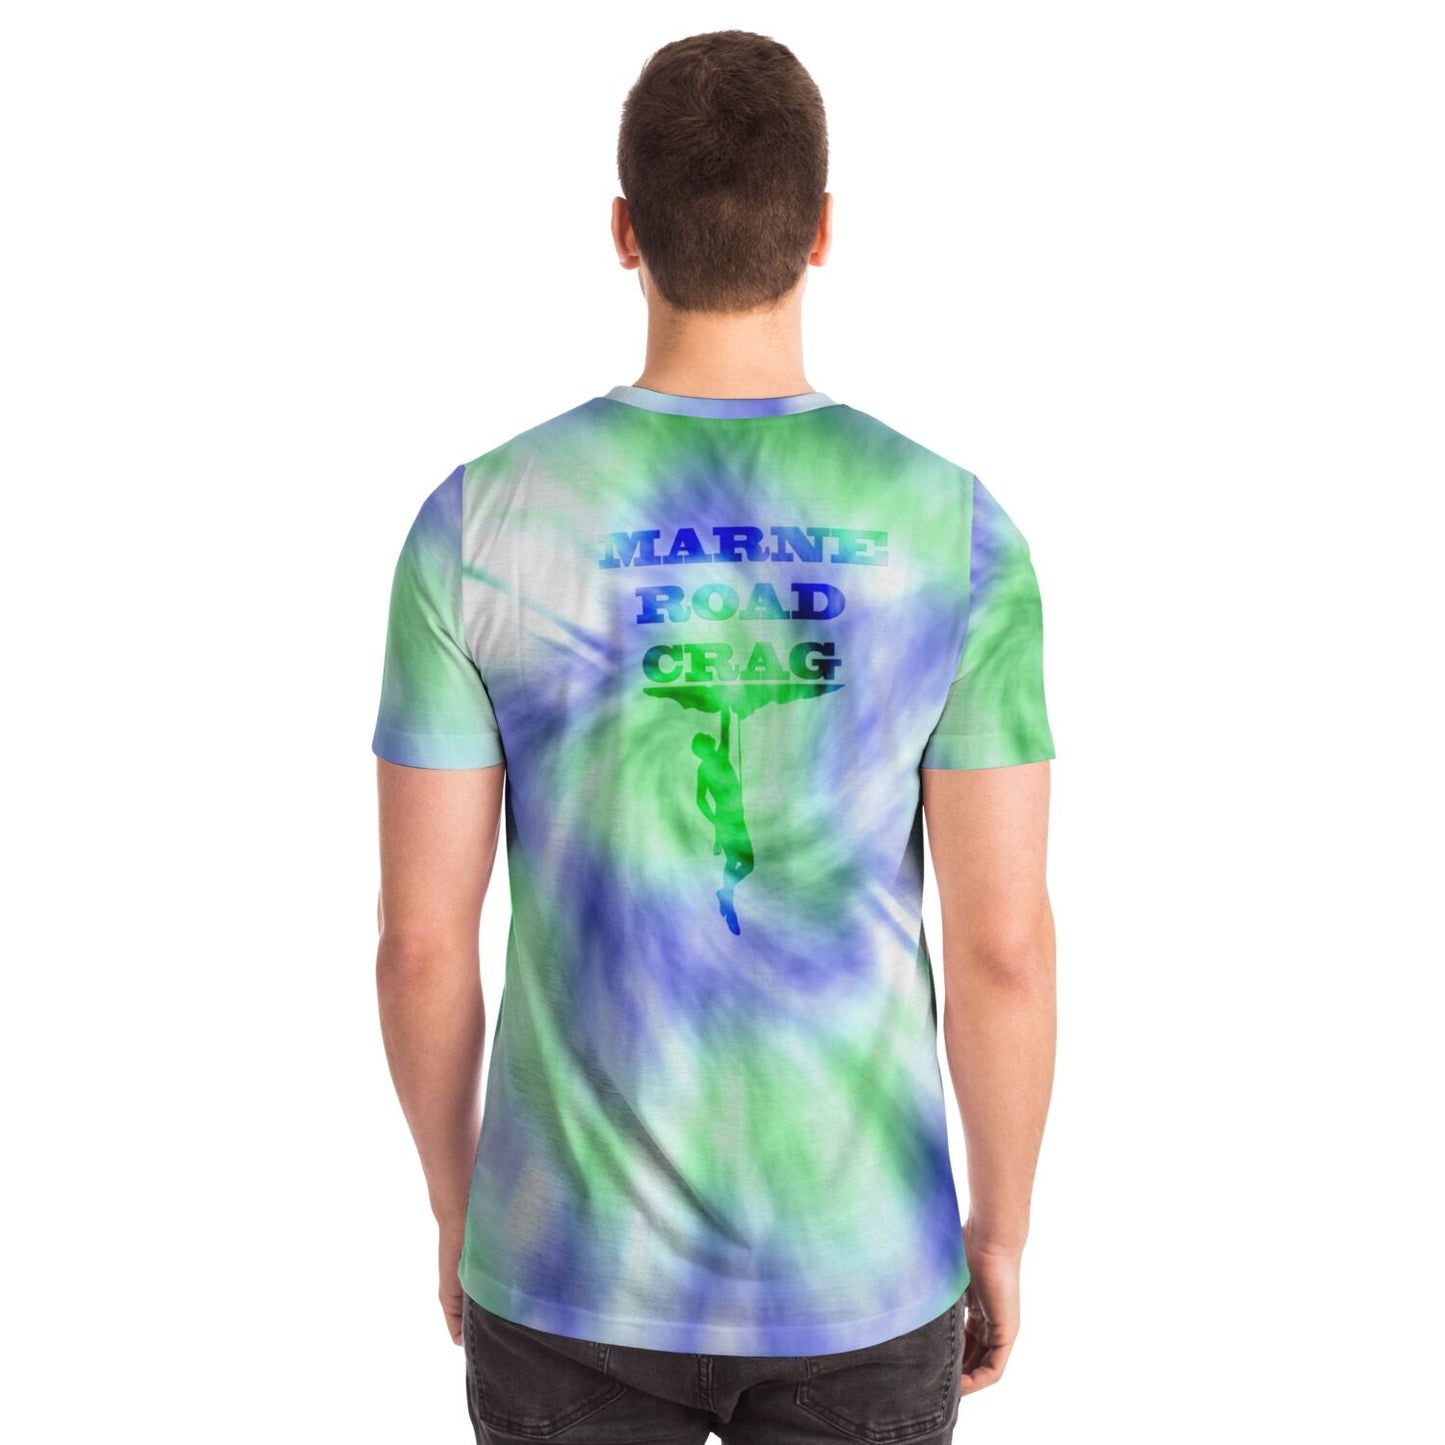 Tie Dyes - Blue and Green (Marne Road)